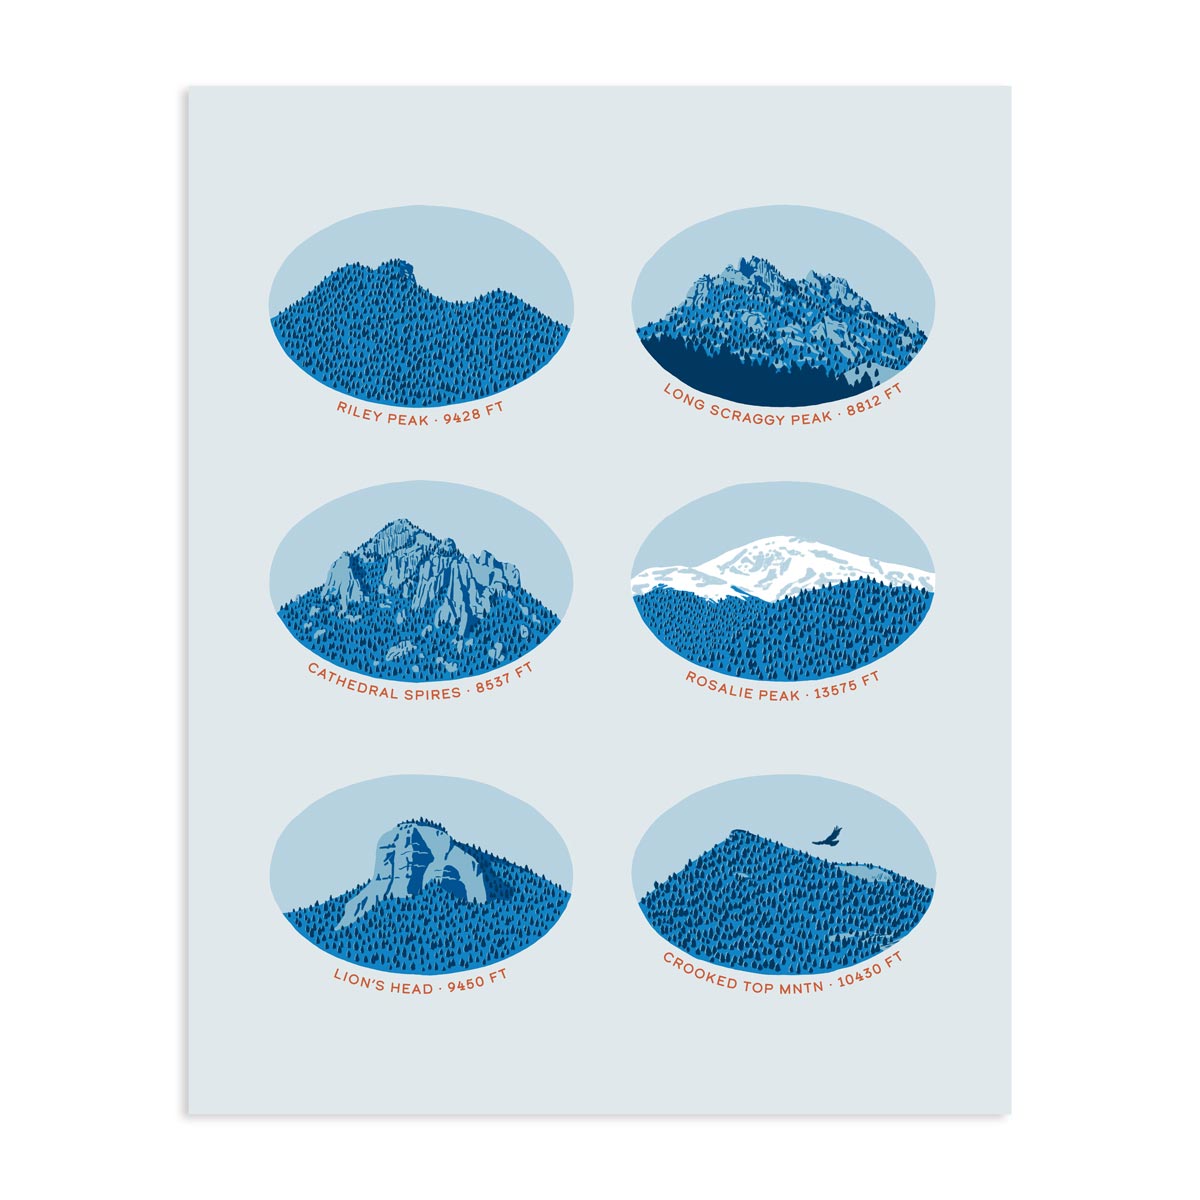 A print with six illustrations of Colorado mountains, including Riley Peak, Cathedral Spires, Long Scraggy, Rosalie Peak, Lion's Head, and Crooked Top